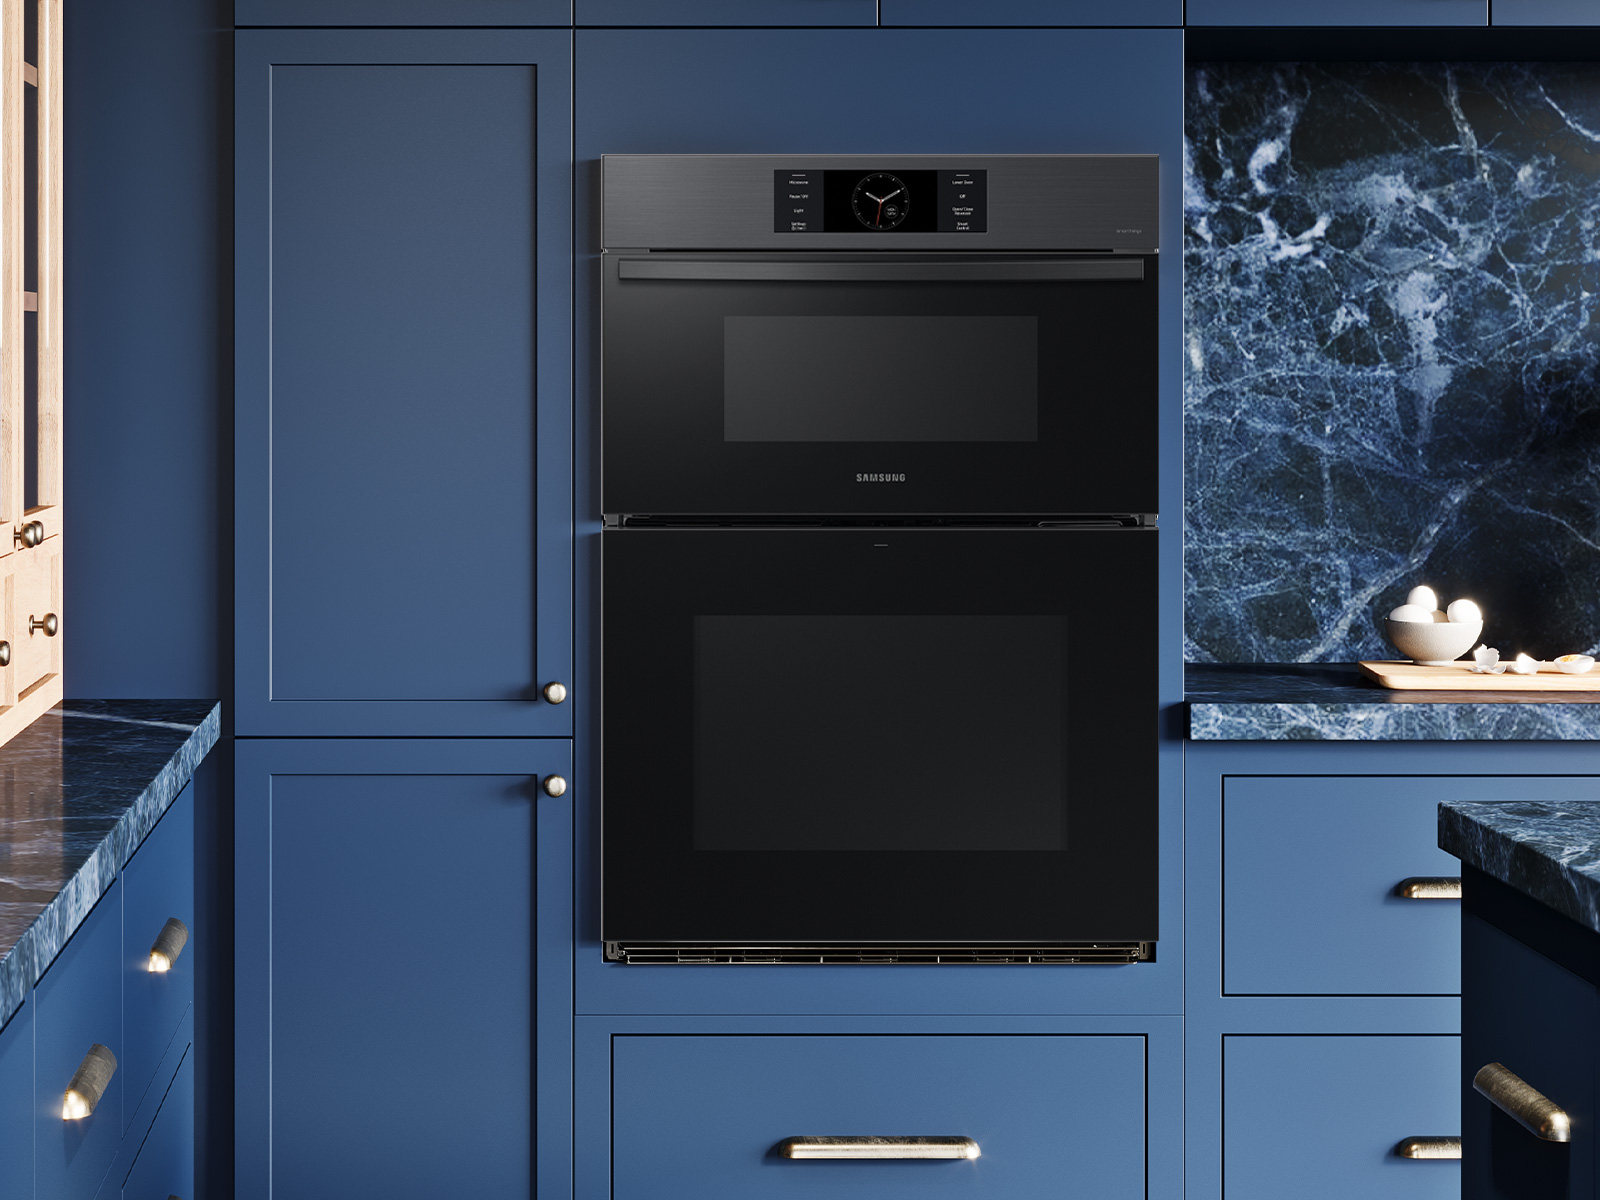 Samsung Bespoke 30 Matte Black Oven/Microwave Combination Electric Wall Oven